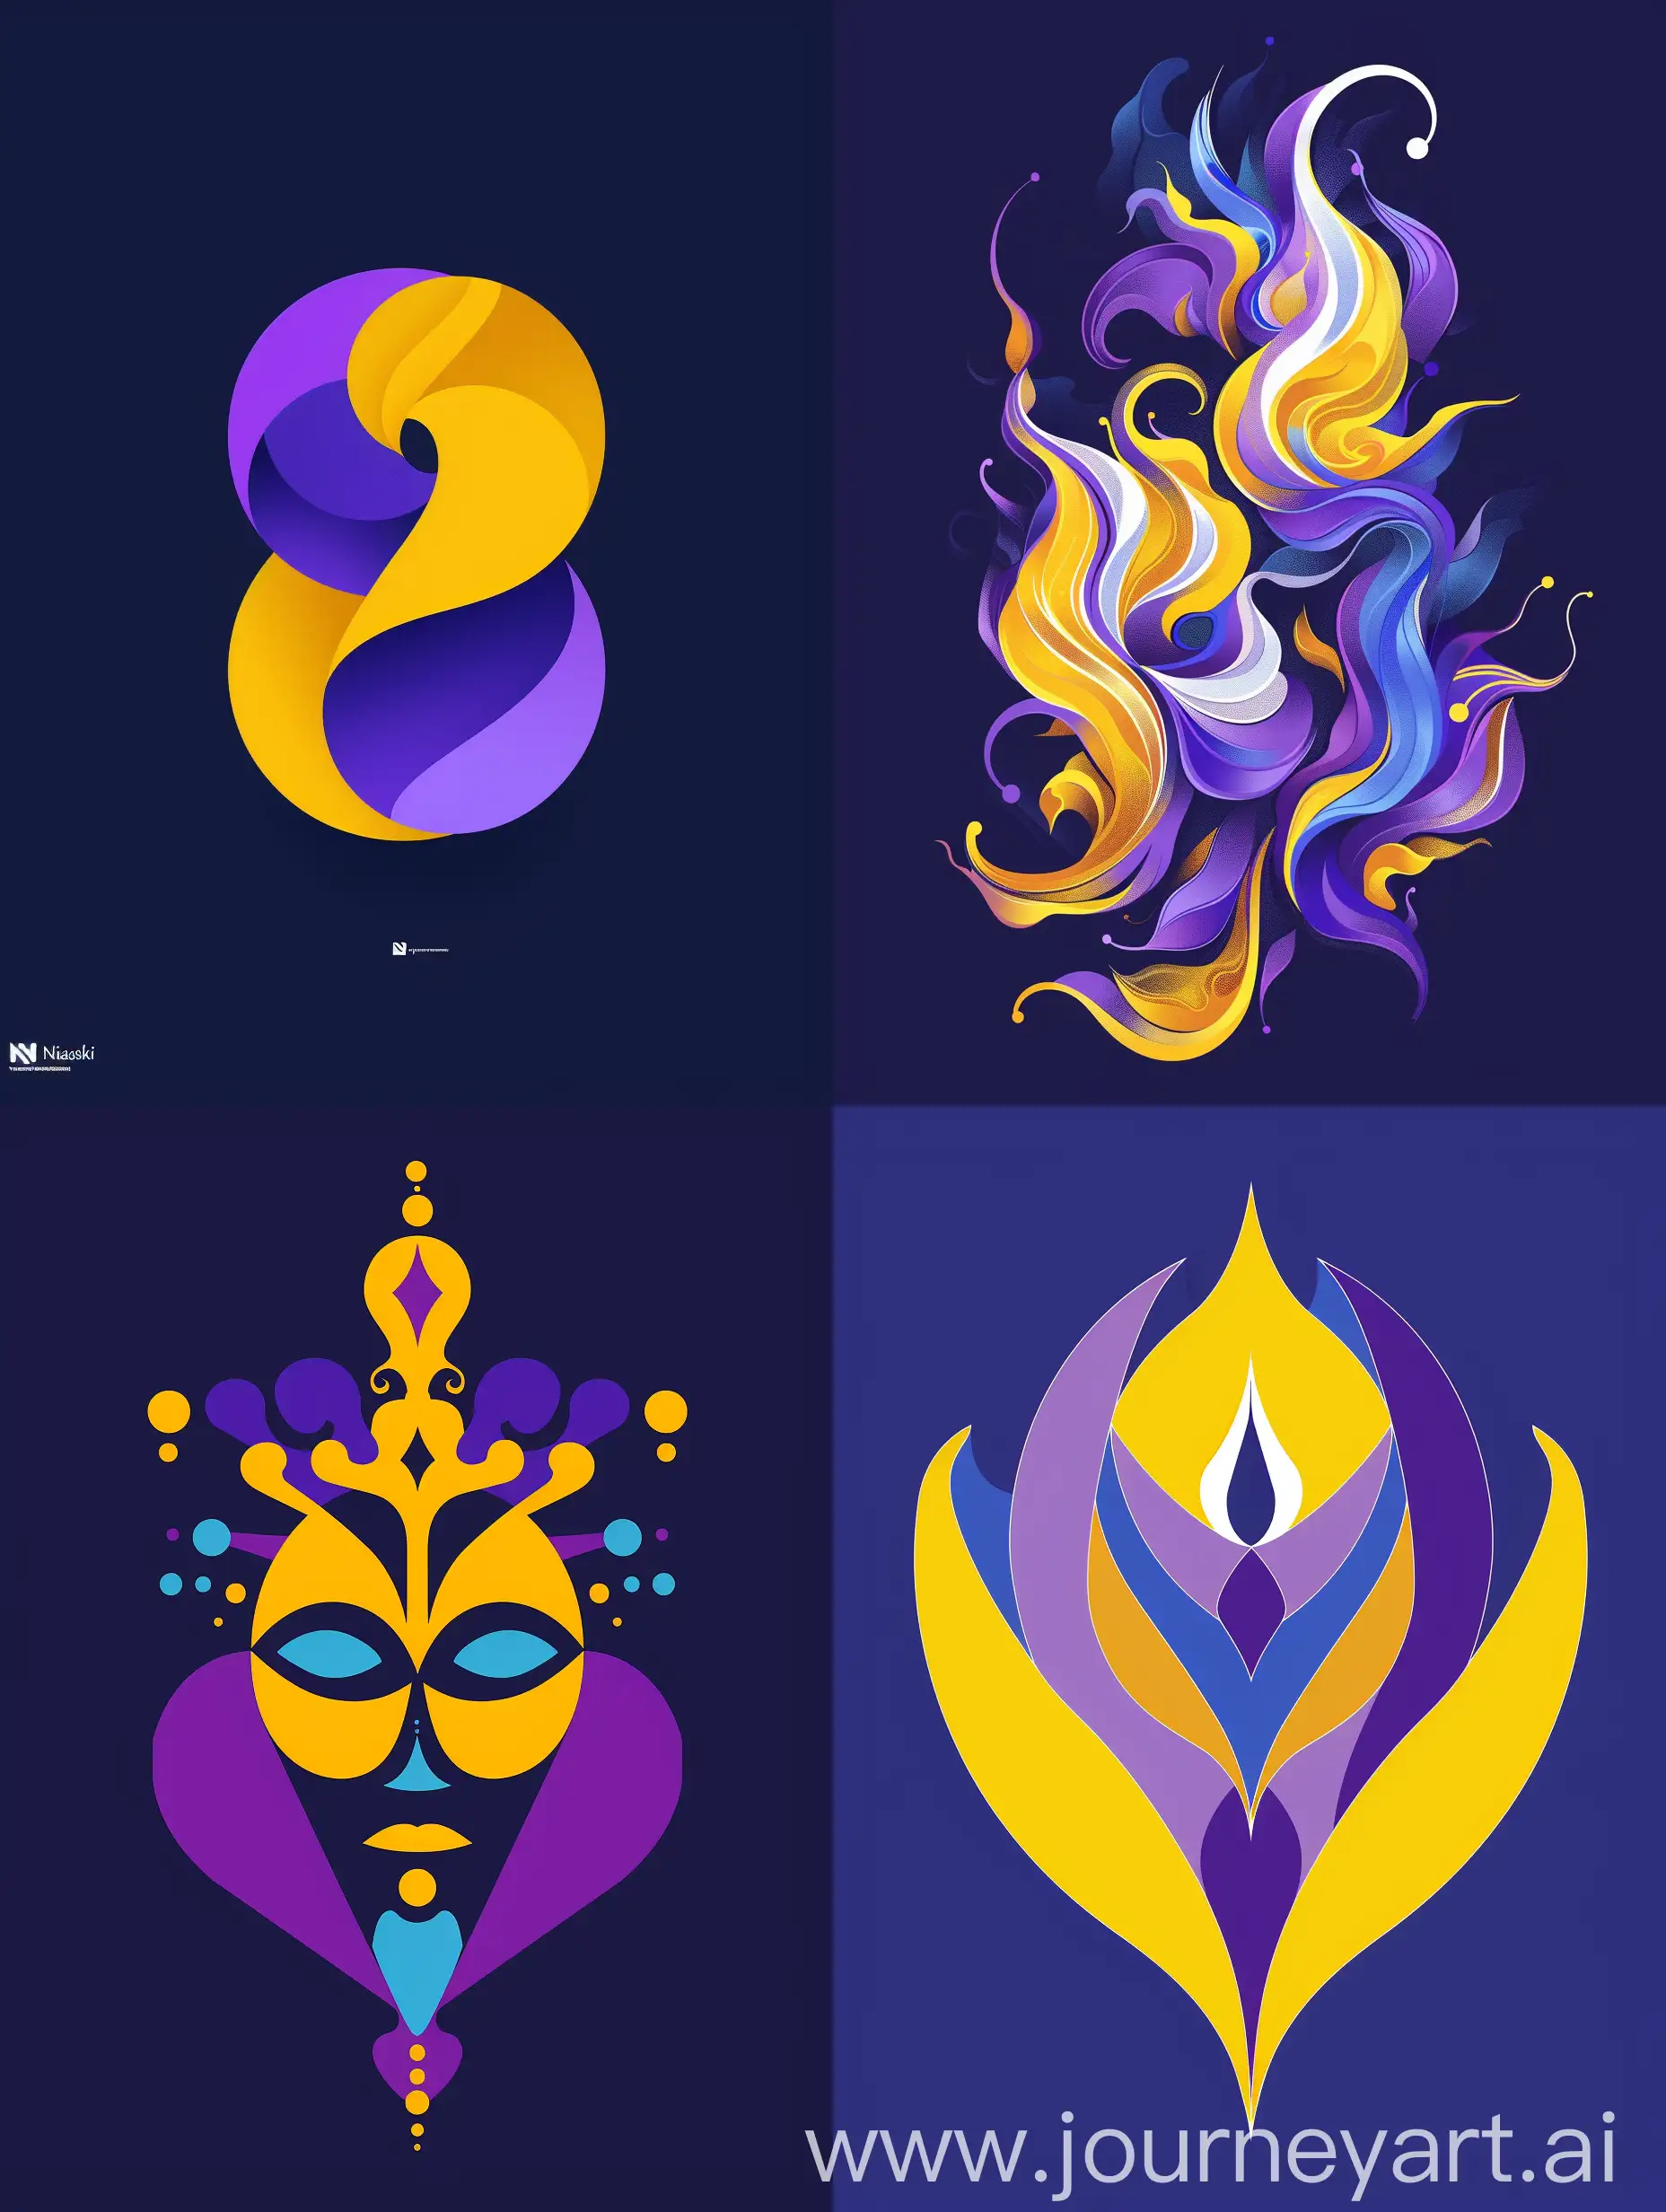 Create an attractive two-dimensional challenge logo called Nimaski challenge by combining purple, yellow, and blue colors.